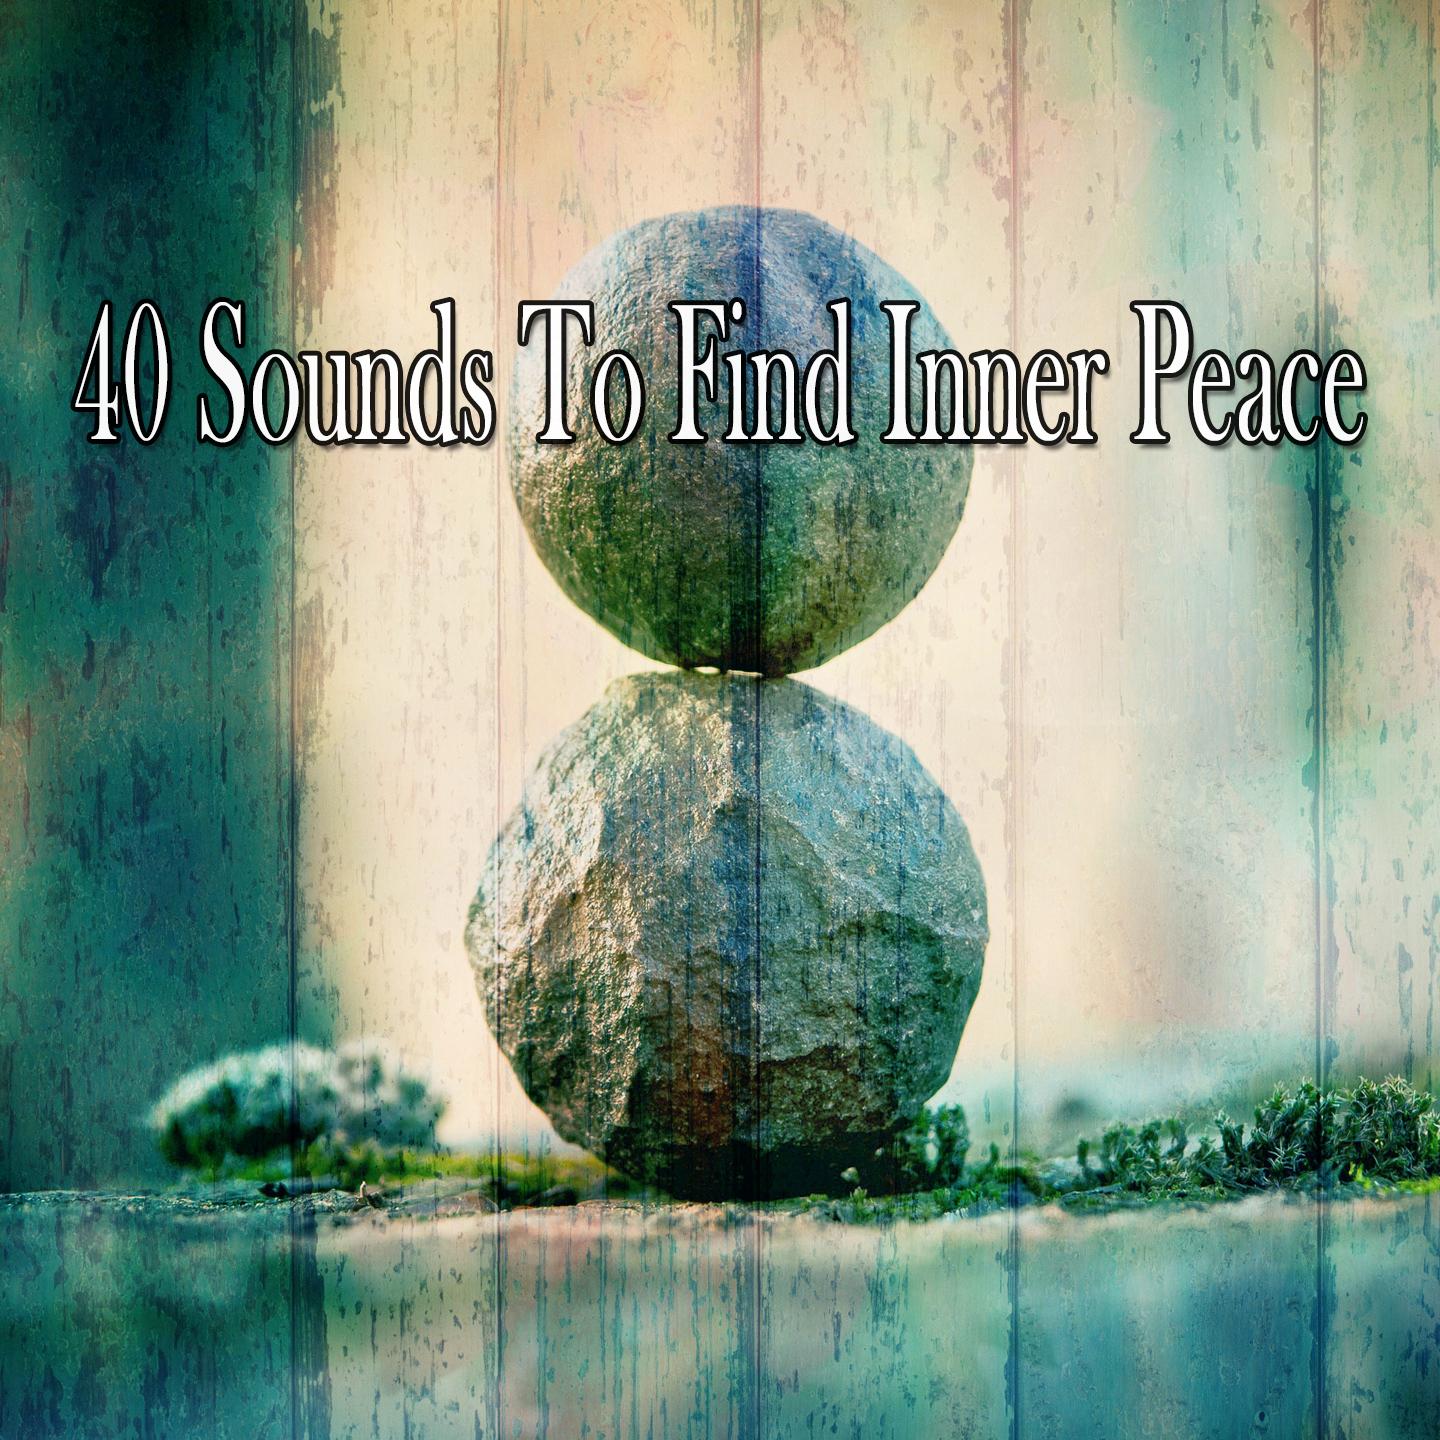 40 Sounds to Find Inner Peace